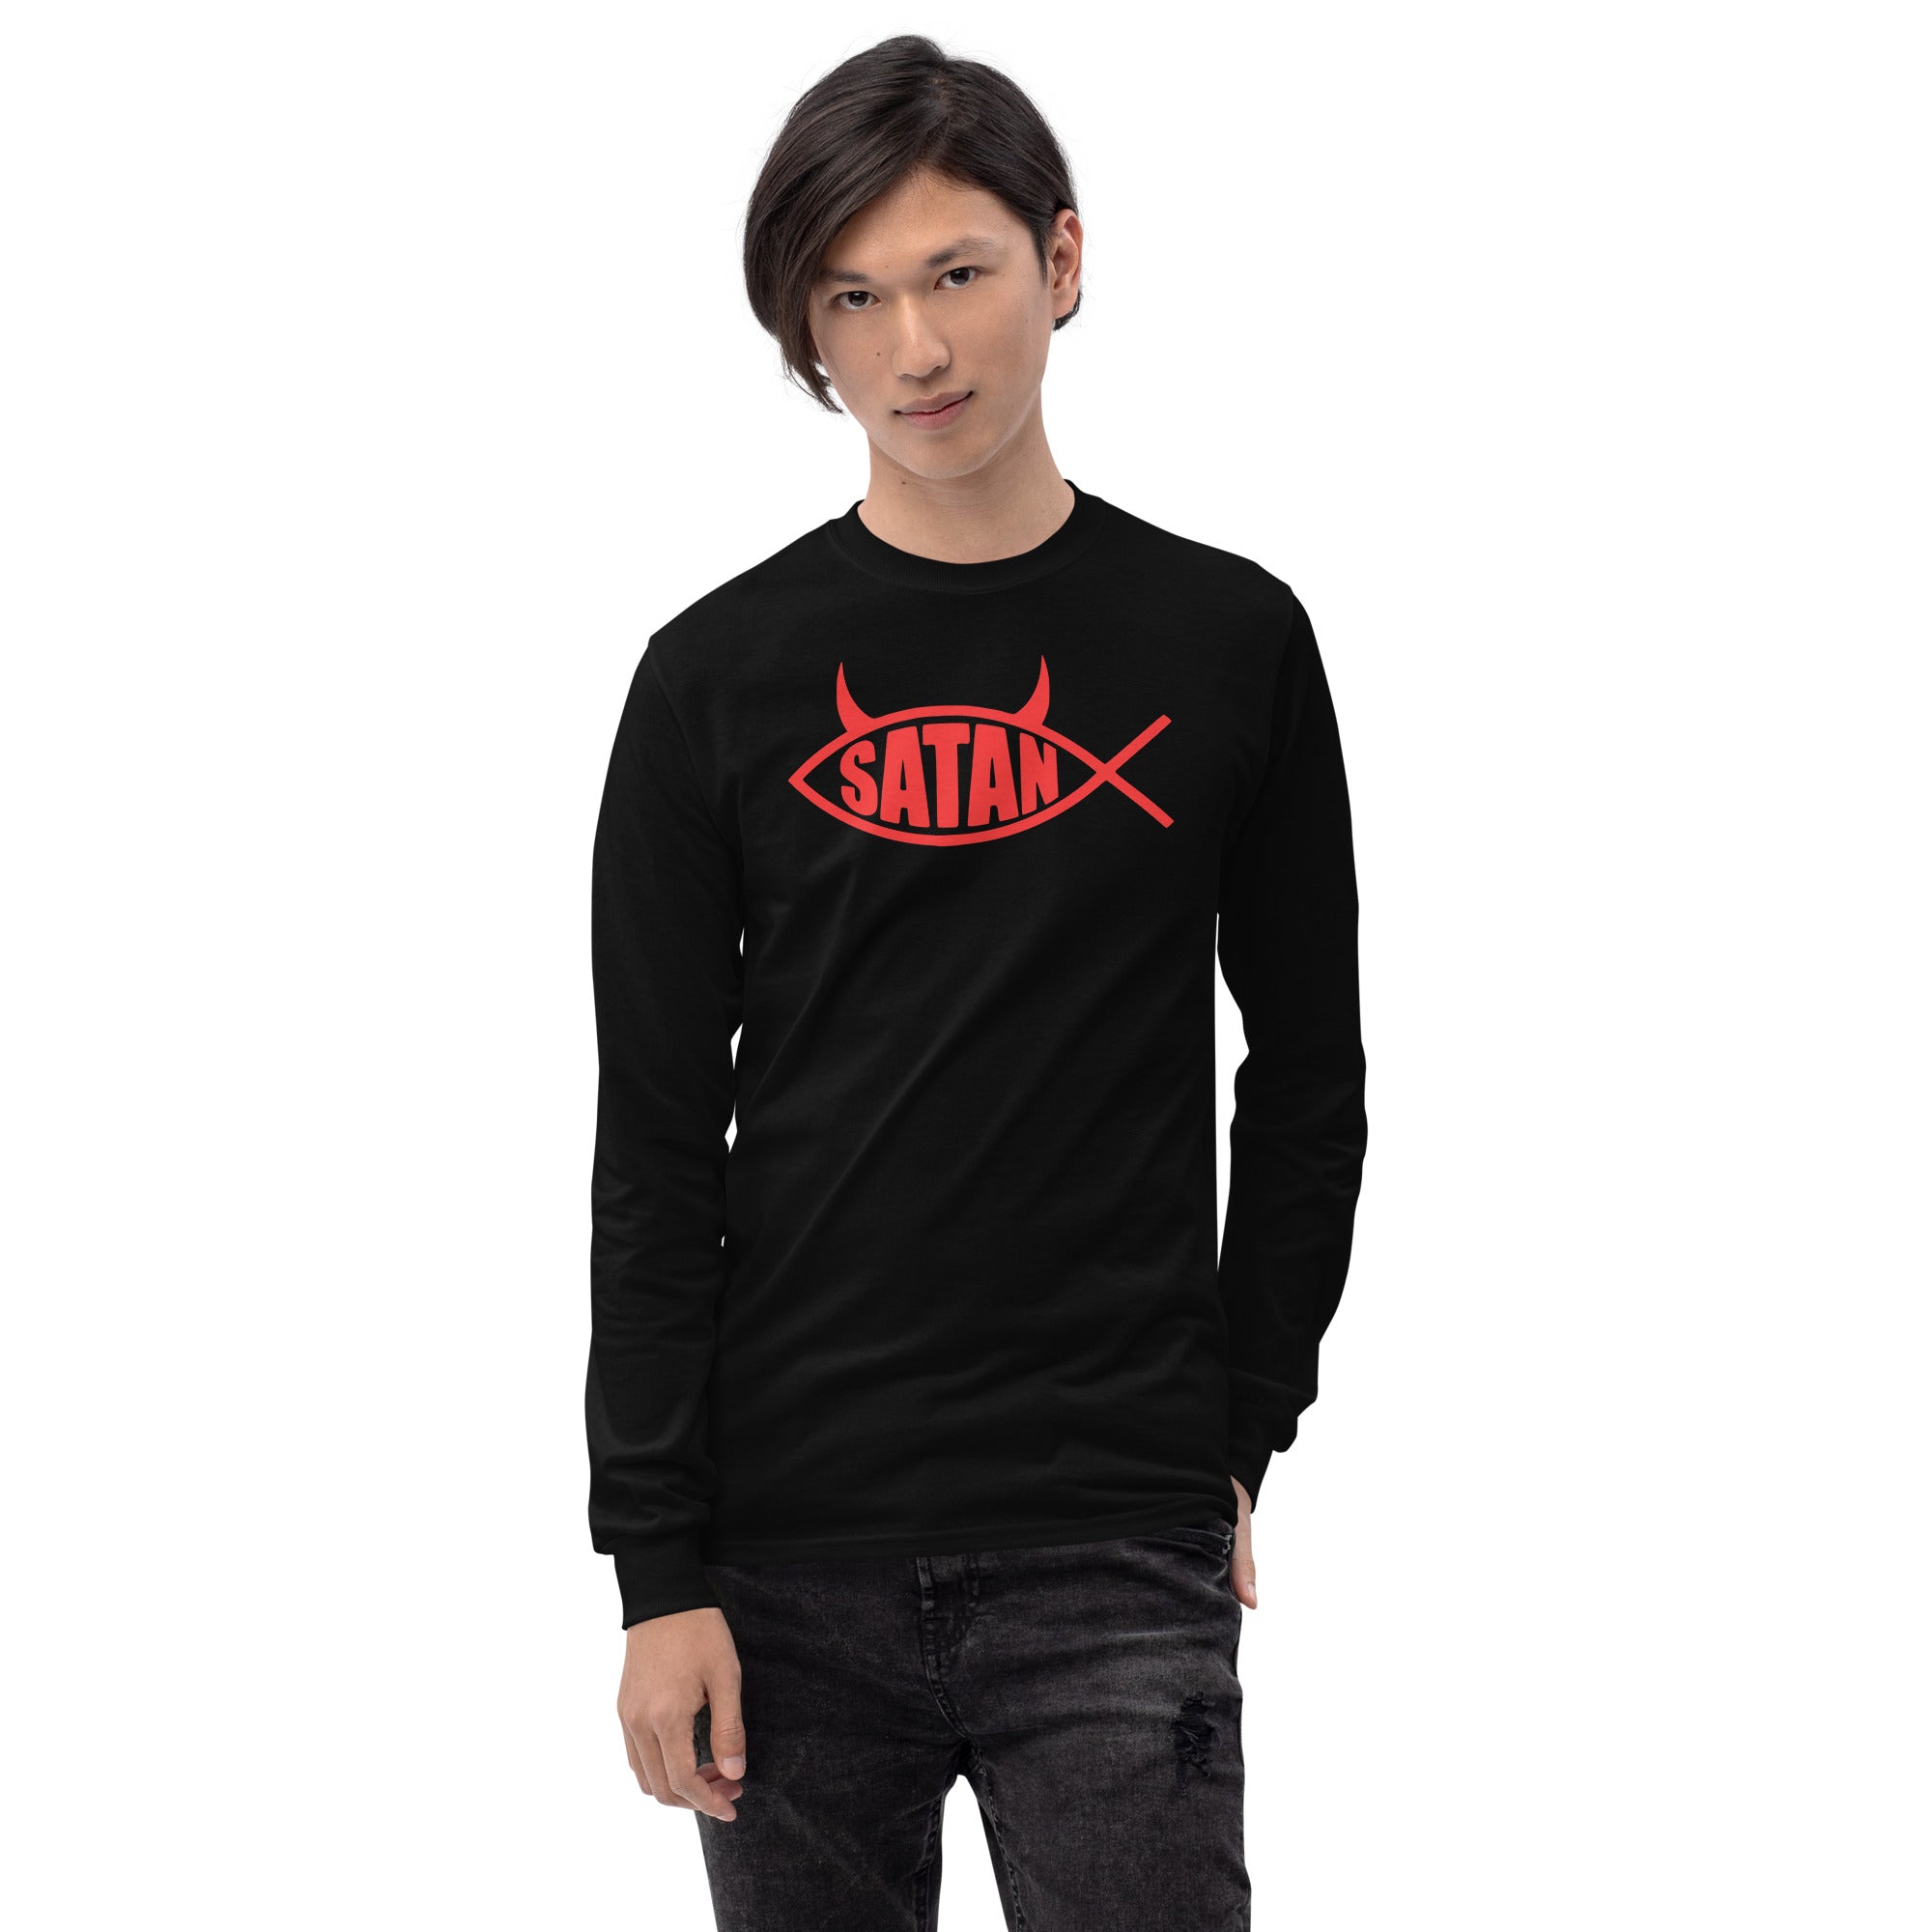 Red Ichthys Satan Fish with Horns Religious Satire Long Sleeve Shirt